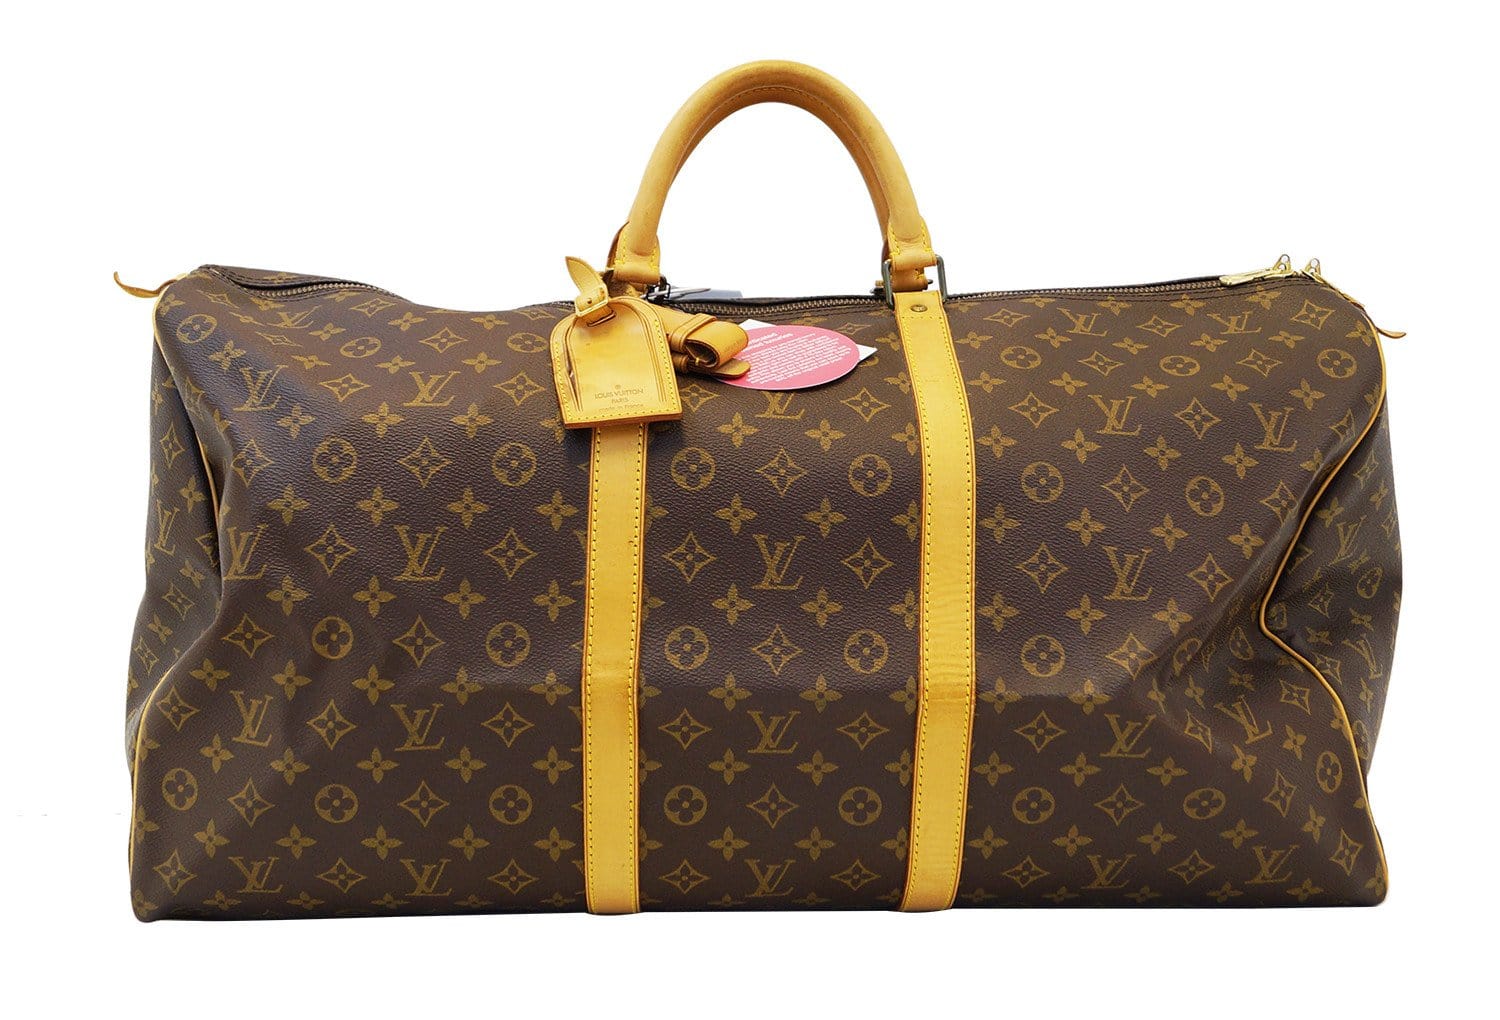 Louis Vuitton 1997 pre-owned Keepall Bandouliere 60 Travel Bag - Farfetch